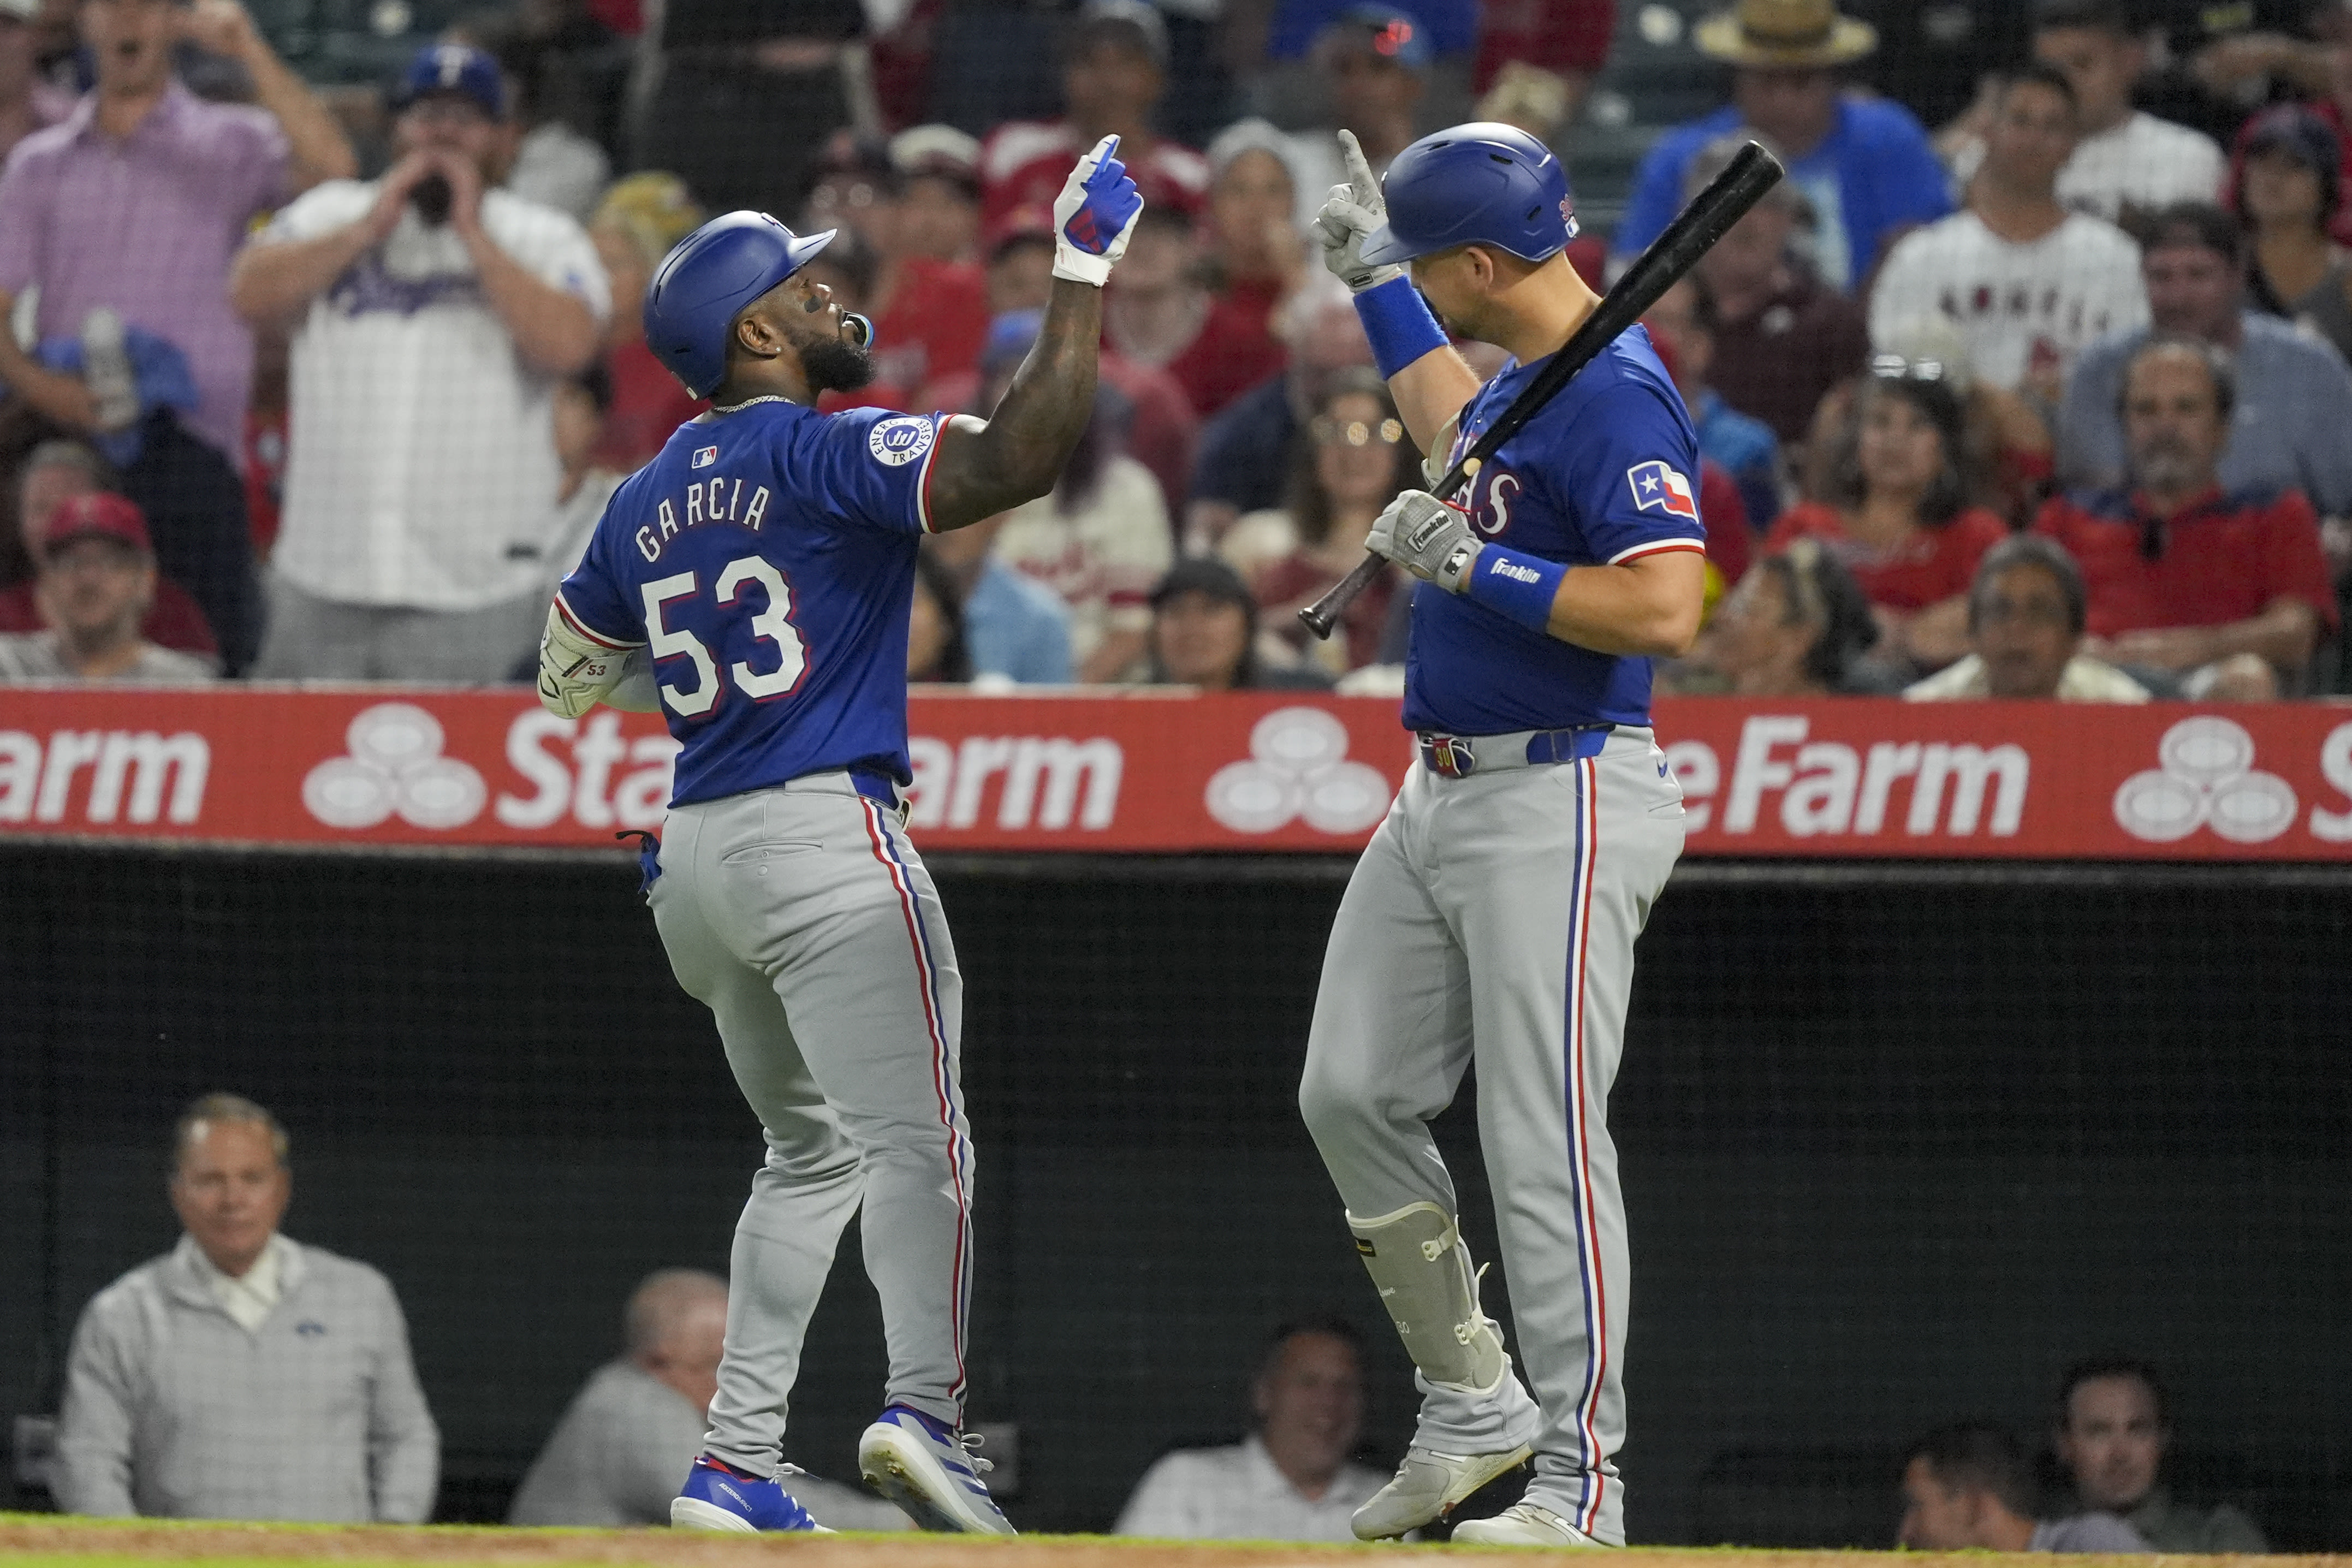 Adolis García's HR in 8th inning gives Rangers 5-4 victory over Angels and extends win streak to 5